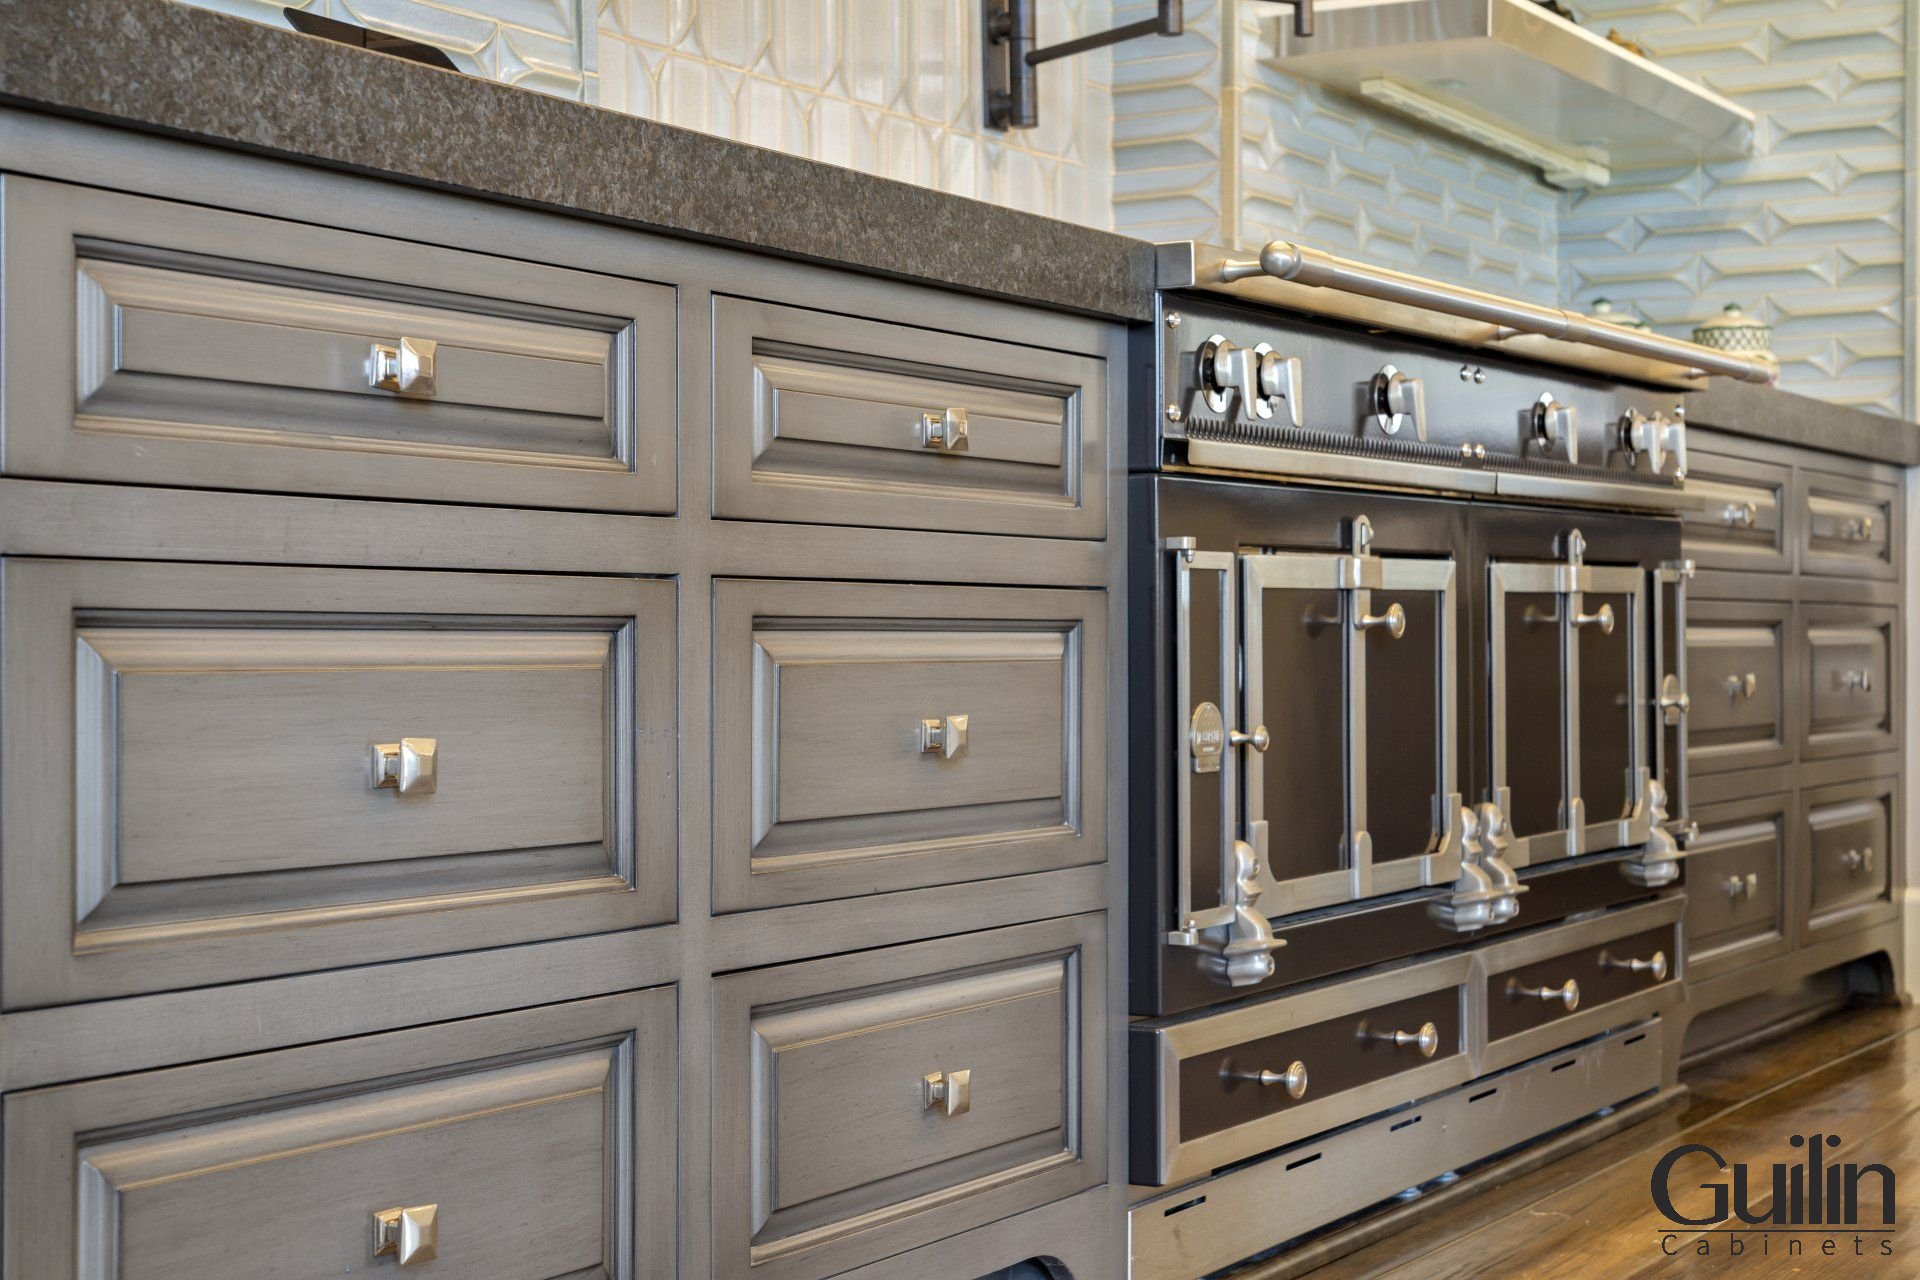 Custom Cabinets with Tranditional style made by Guilin Cabinets